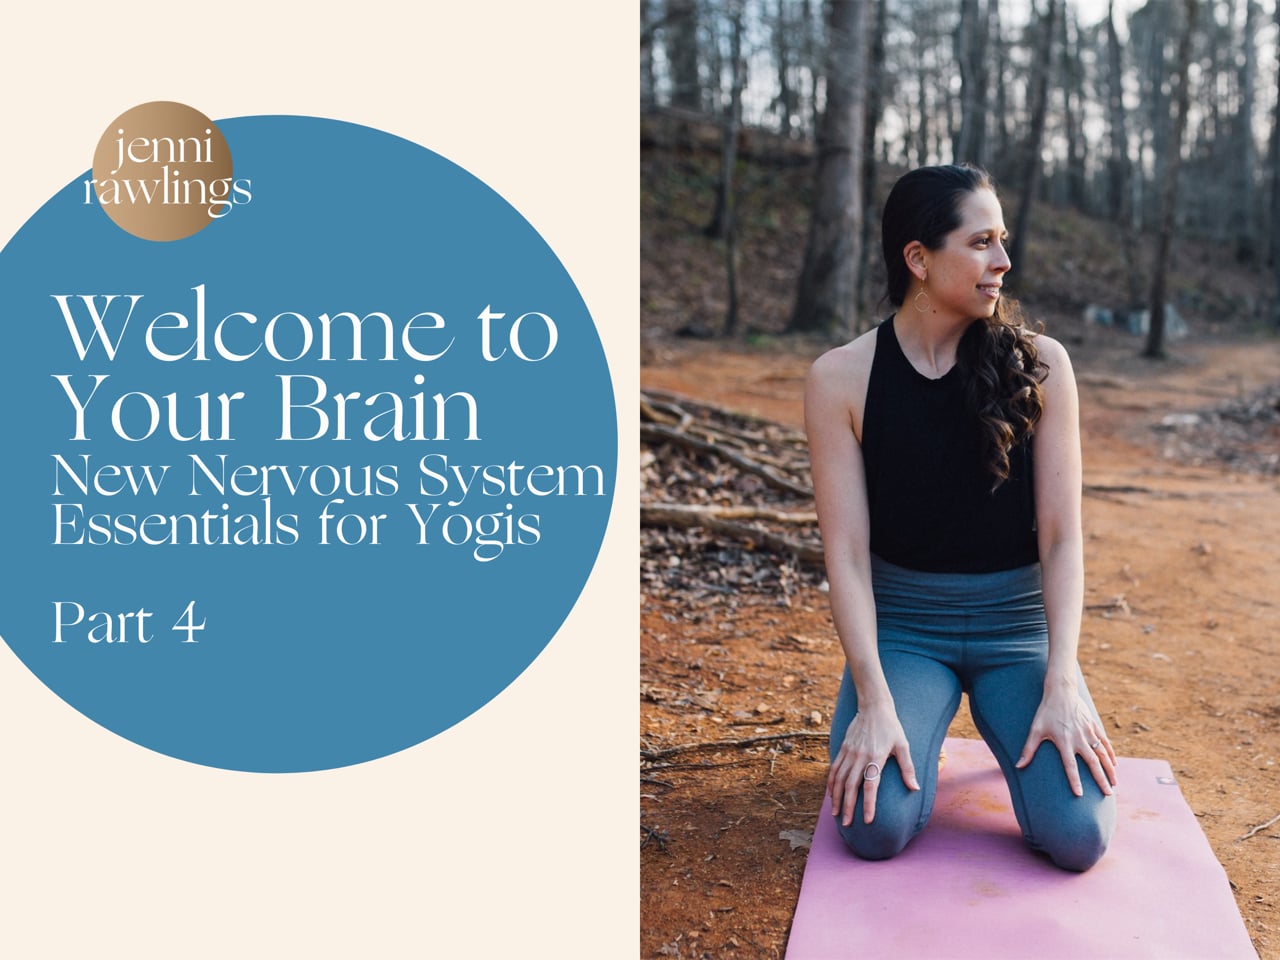 Part 4 – Welcome to Your Brain